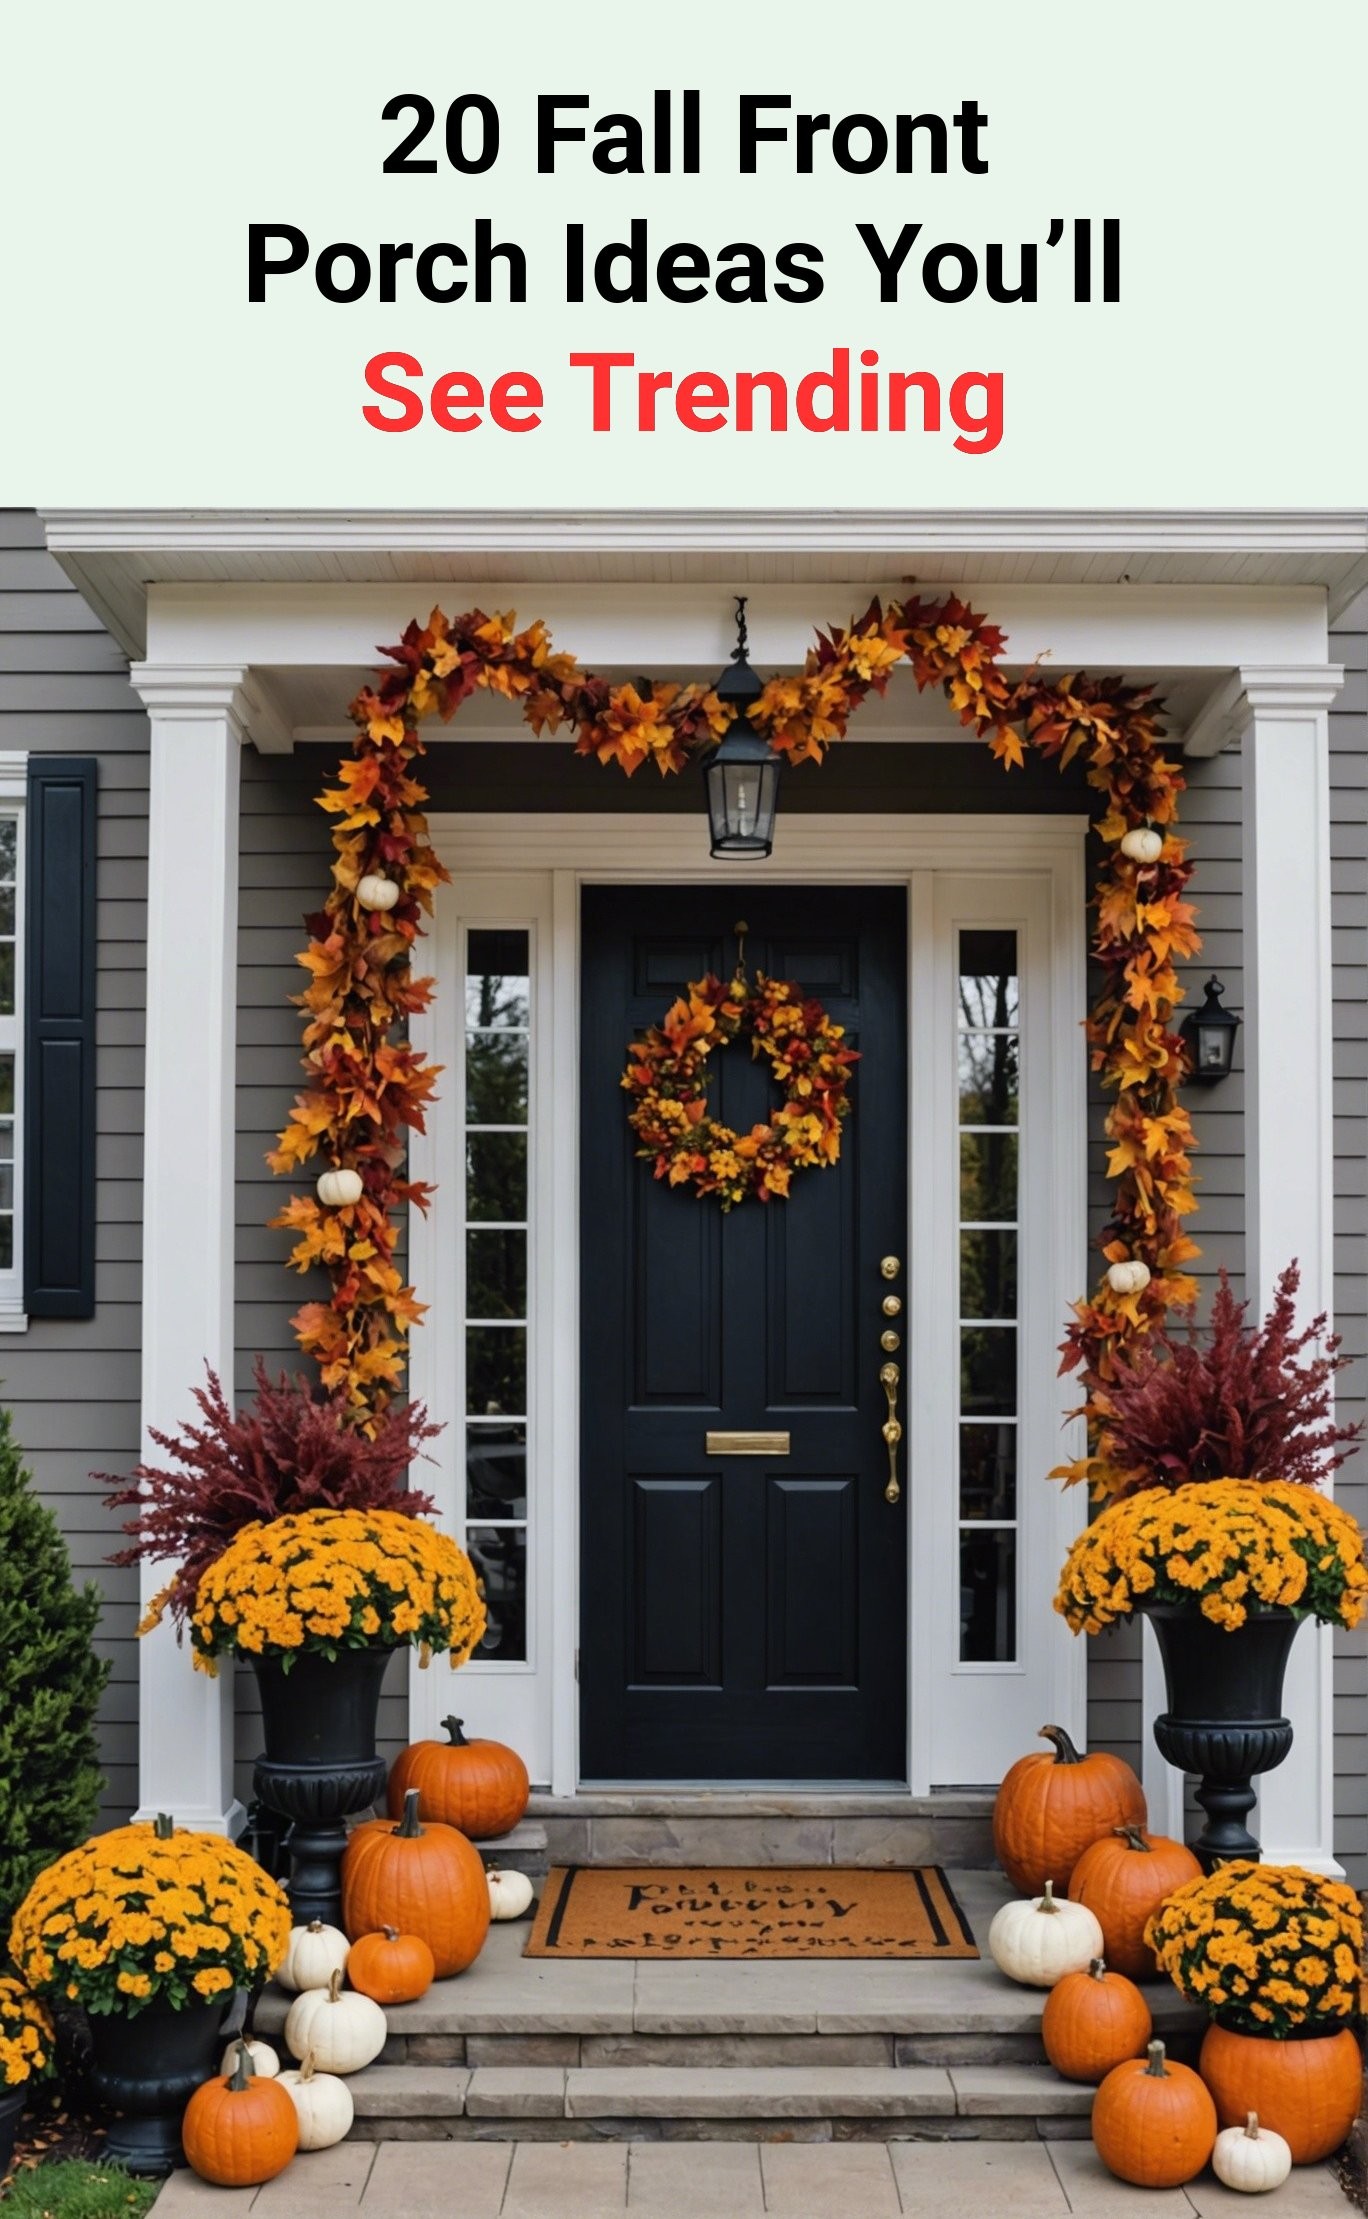 20 Fall Front Porch Ideas You’ll See Trending